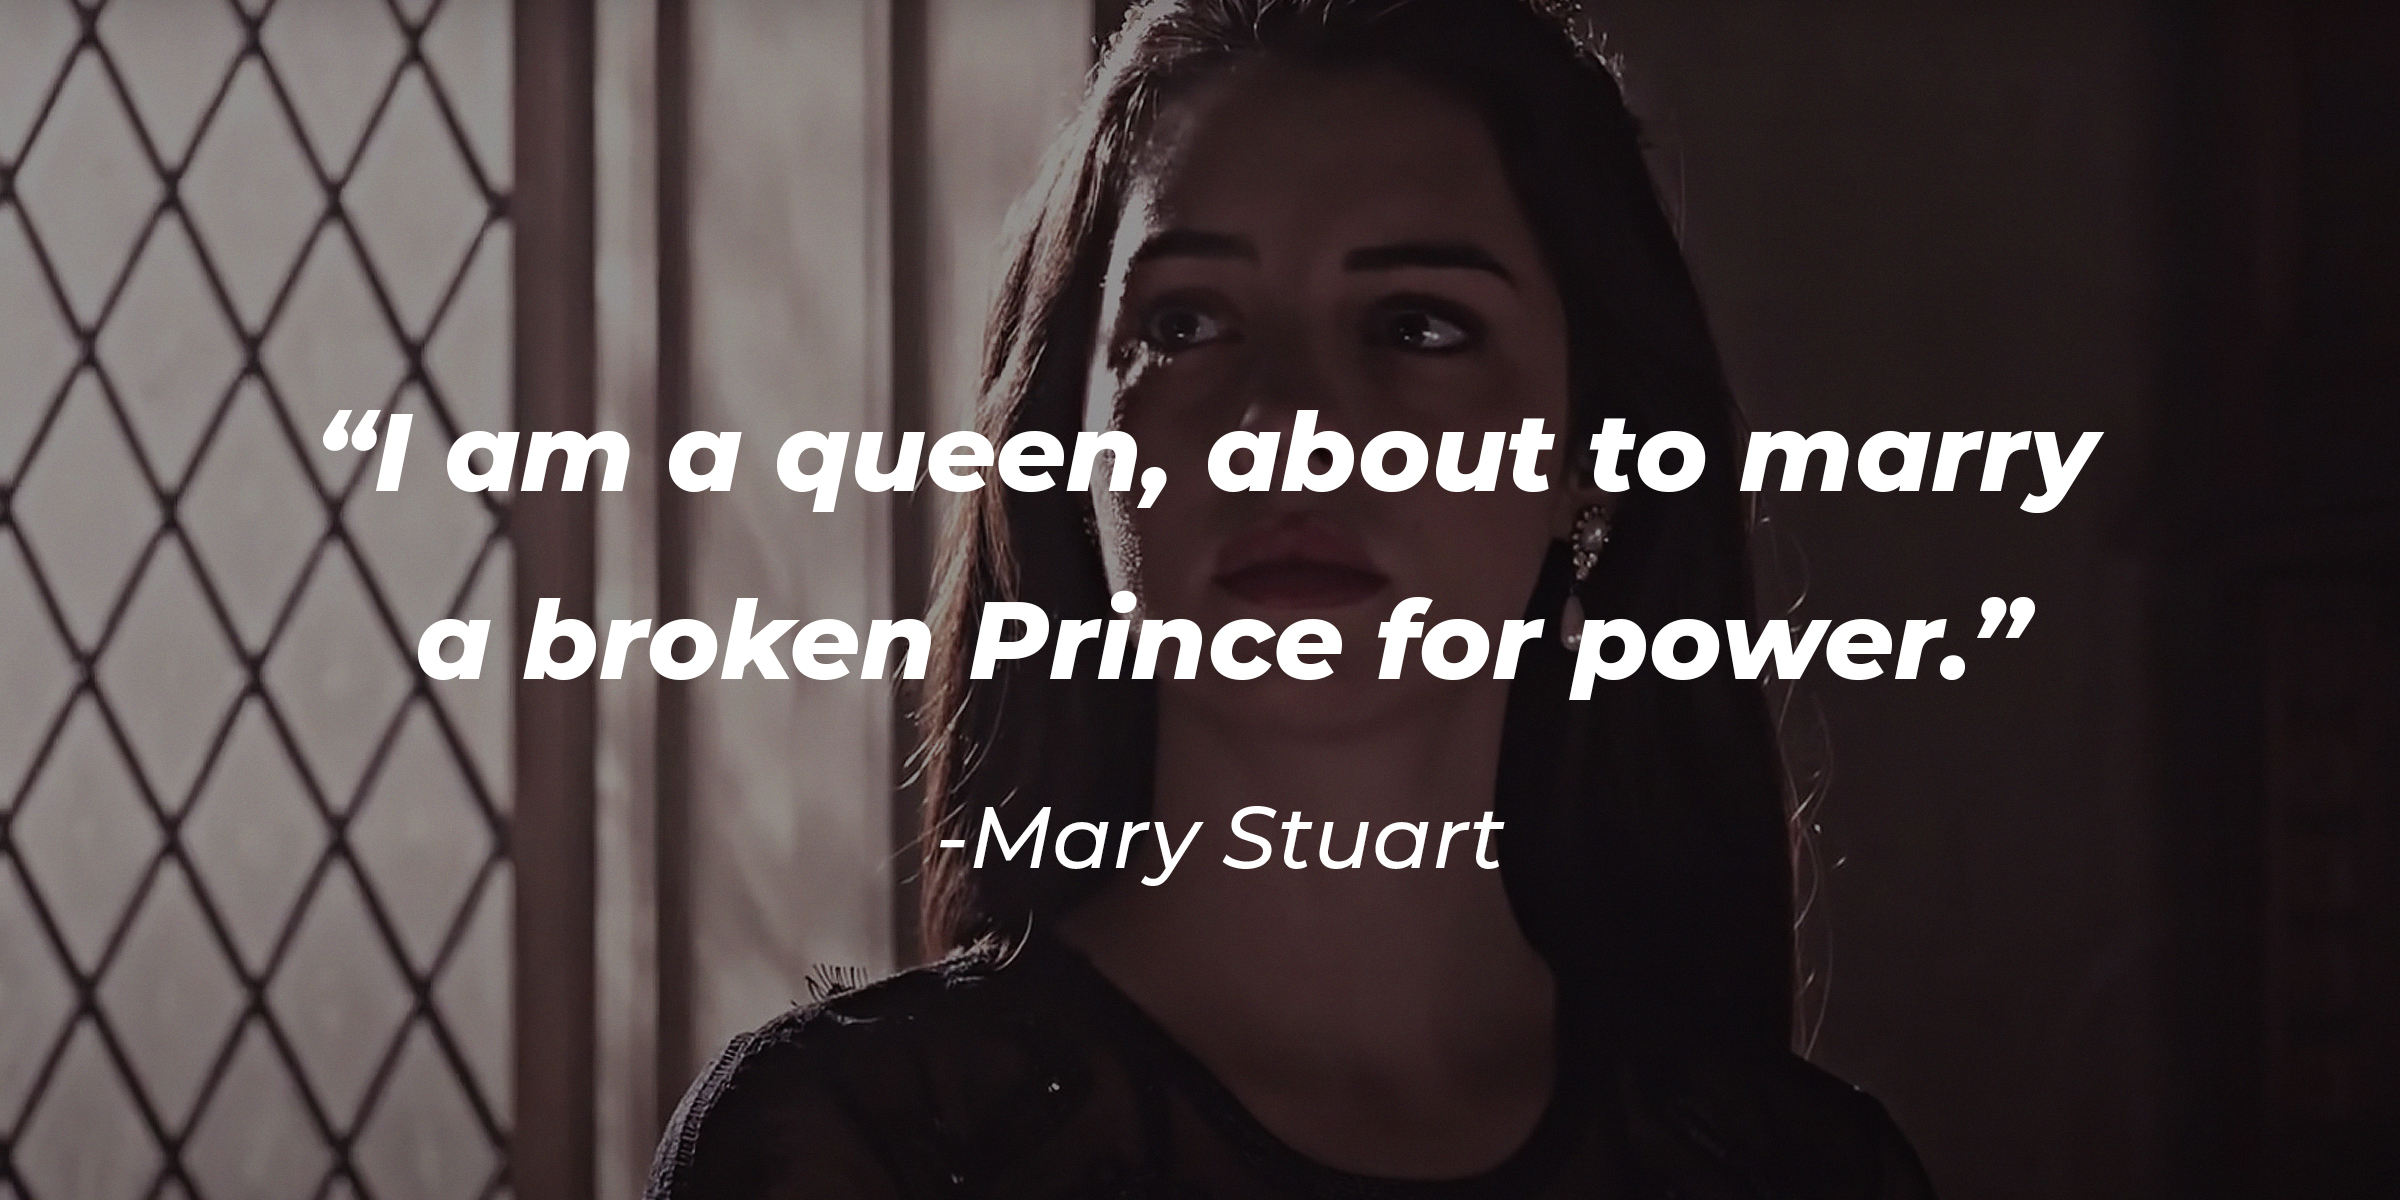 An image of Adelaide Kane as Mary Stuart in "Reign" with the quote: " “I am a queen, about to marry a broken Prince for power.” | Source: facebook.com/Reign